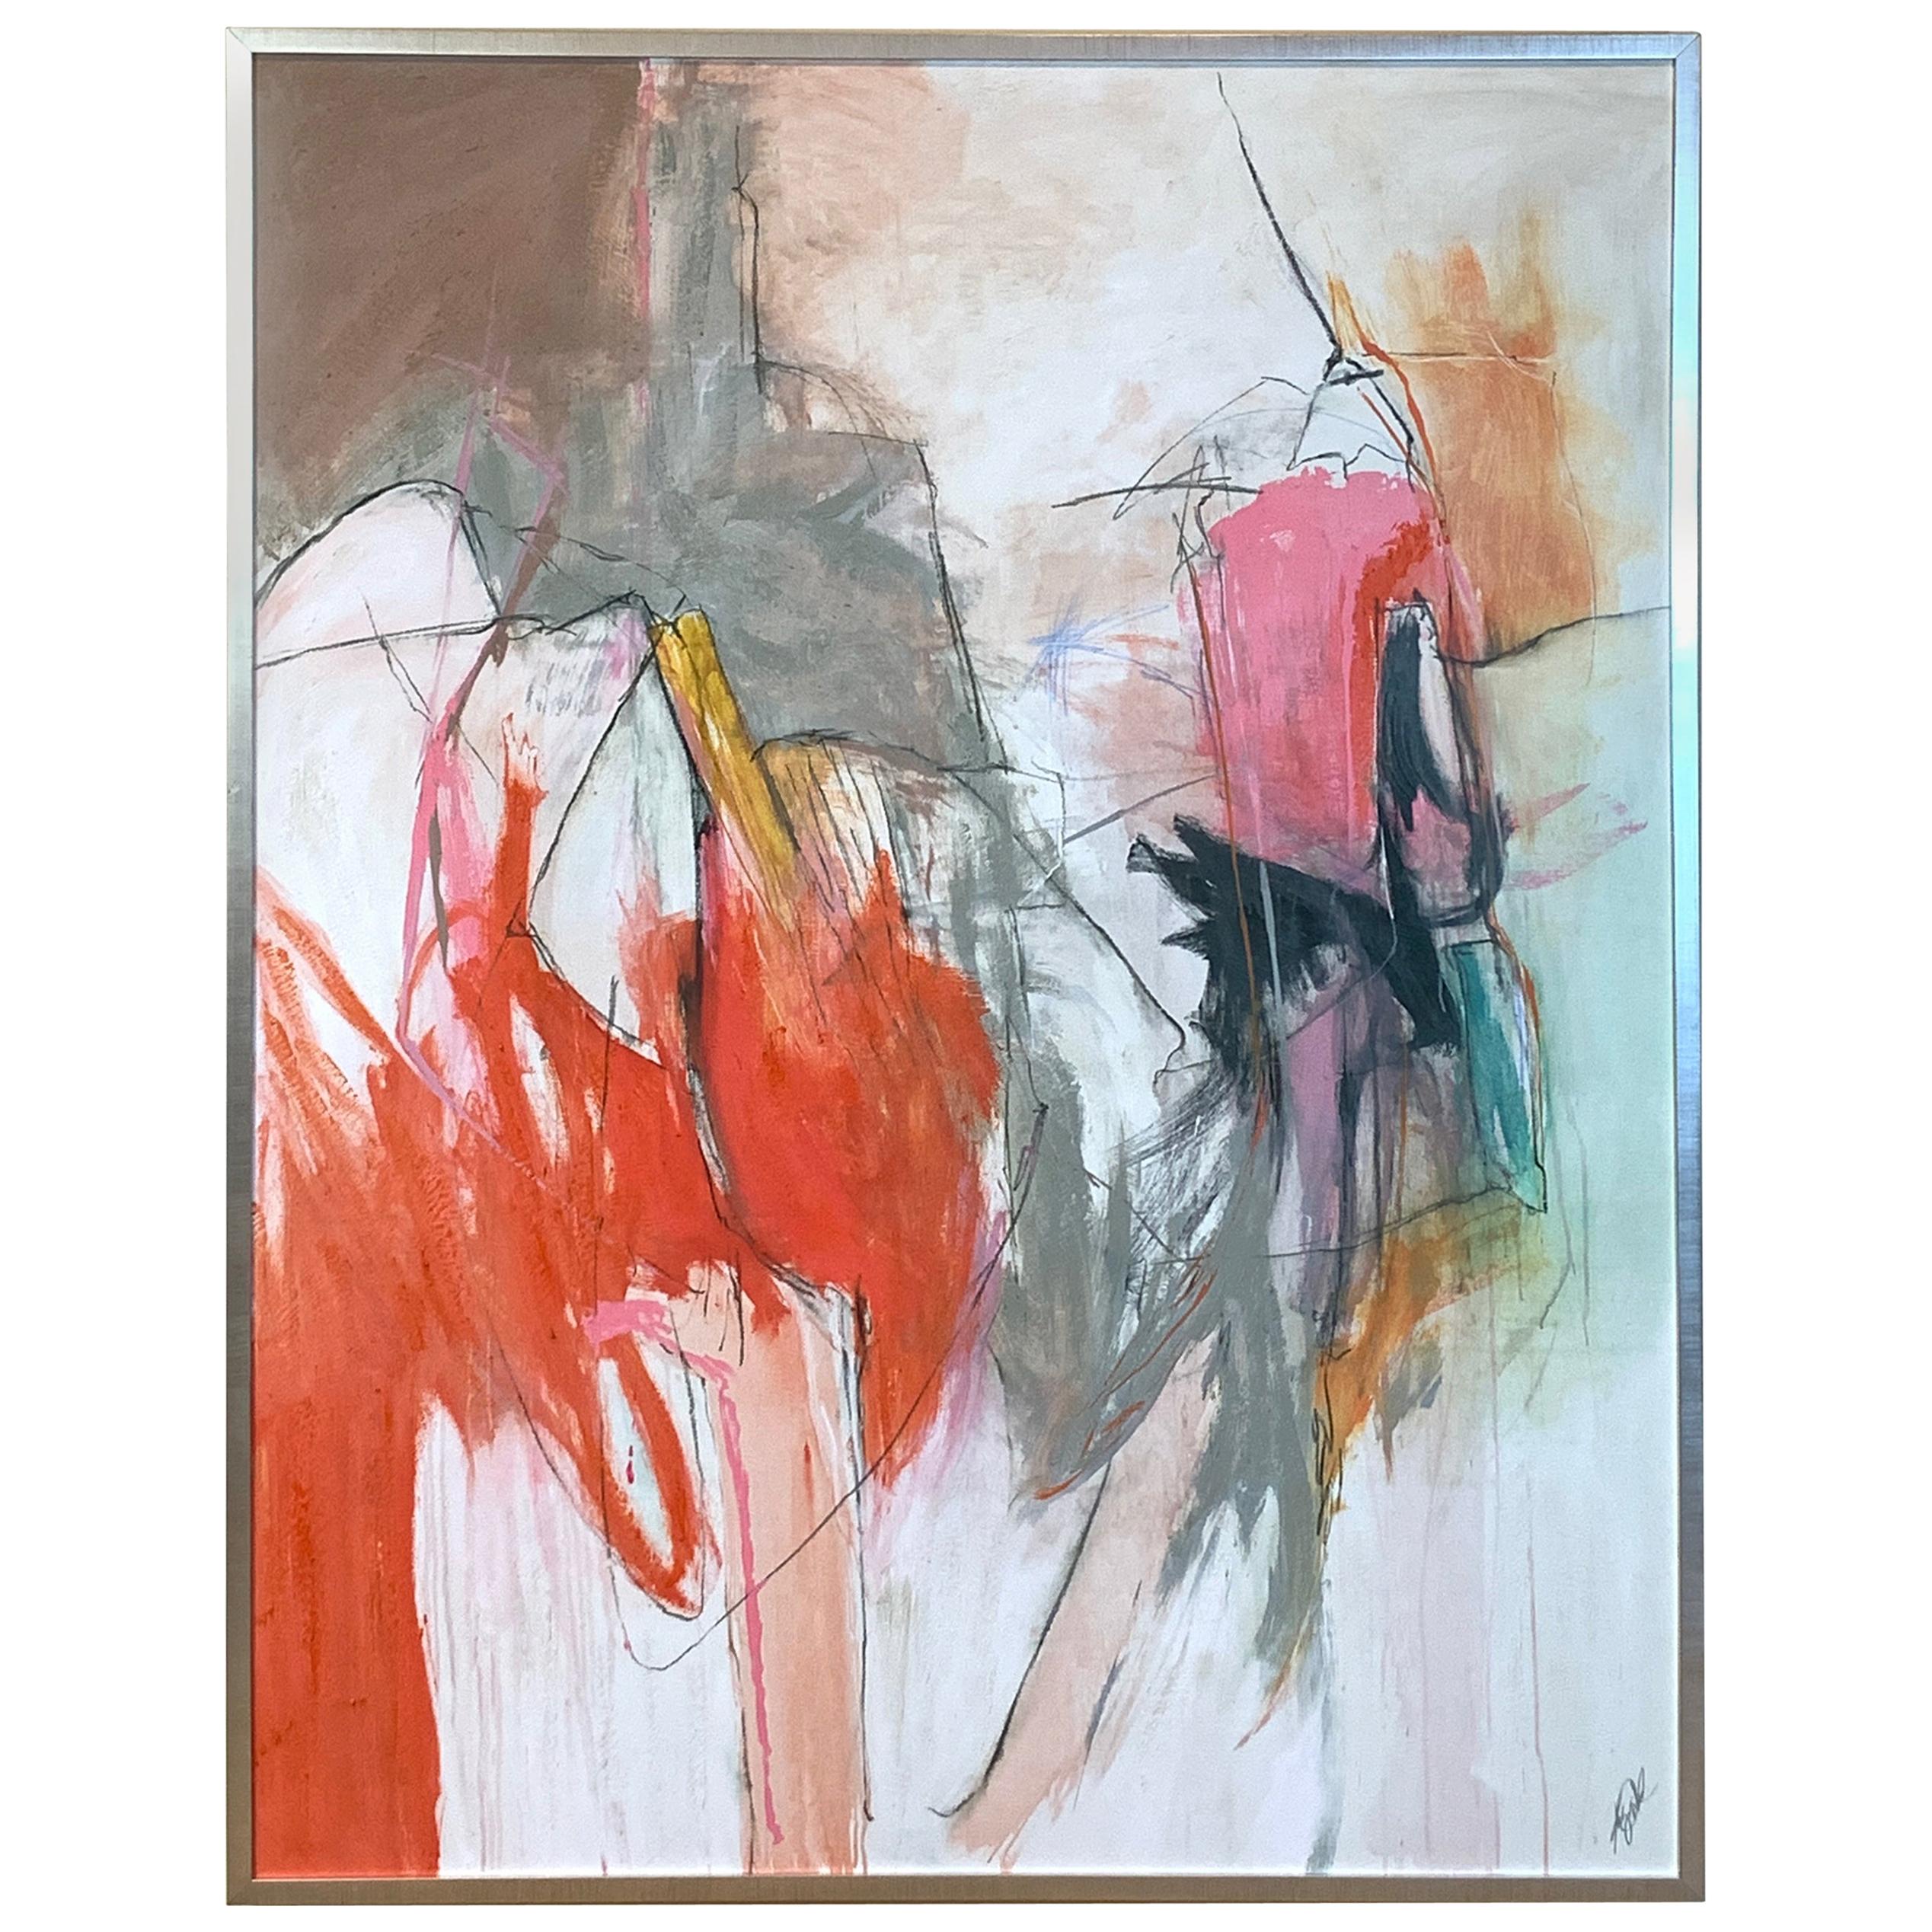 Large Abstract Painting in Oranges, Pinks and Grays